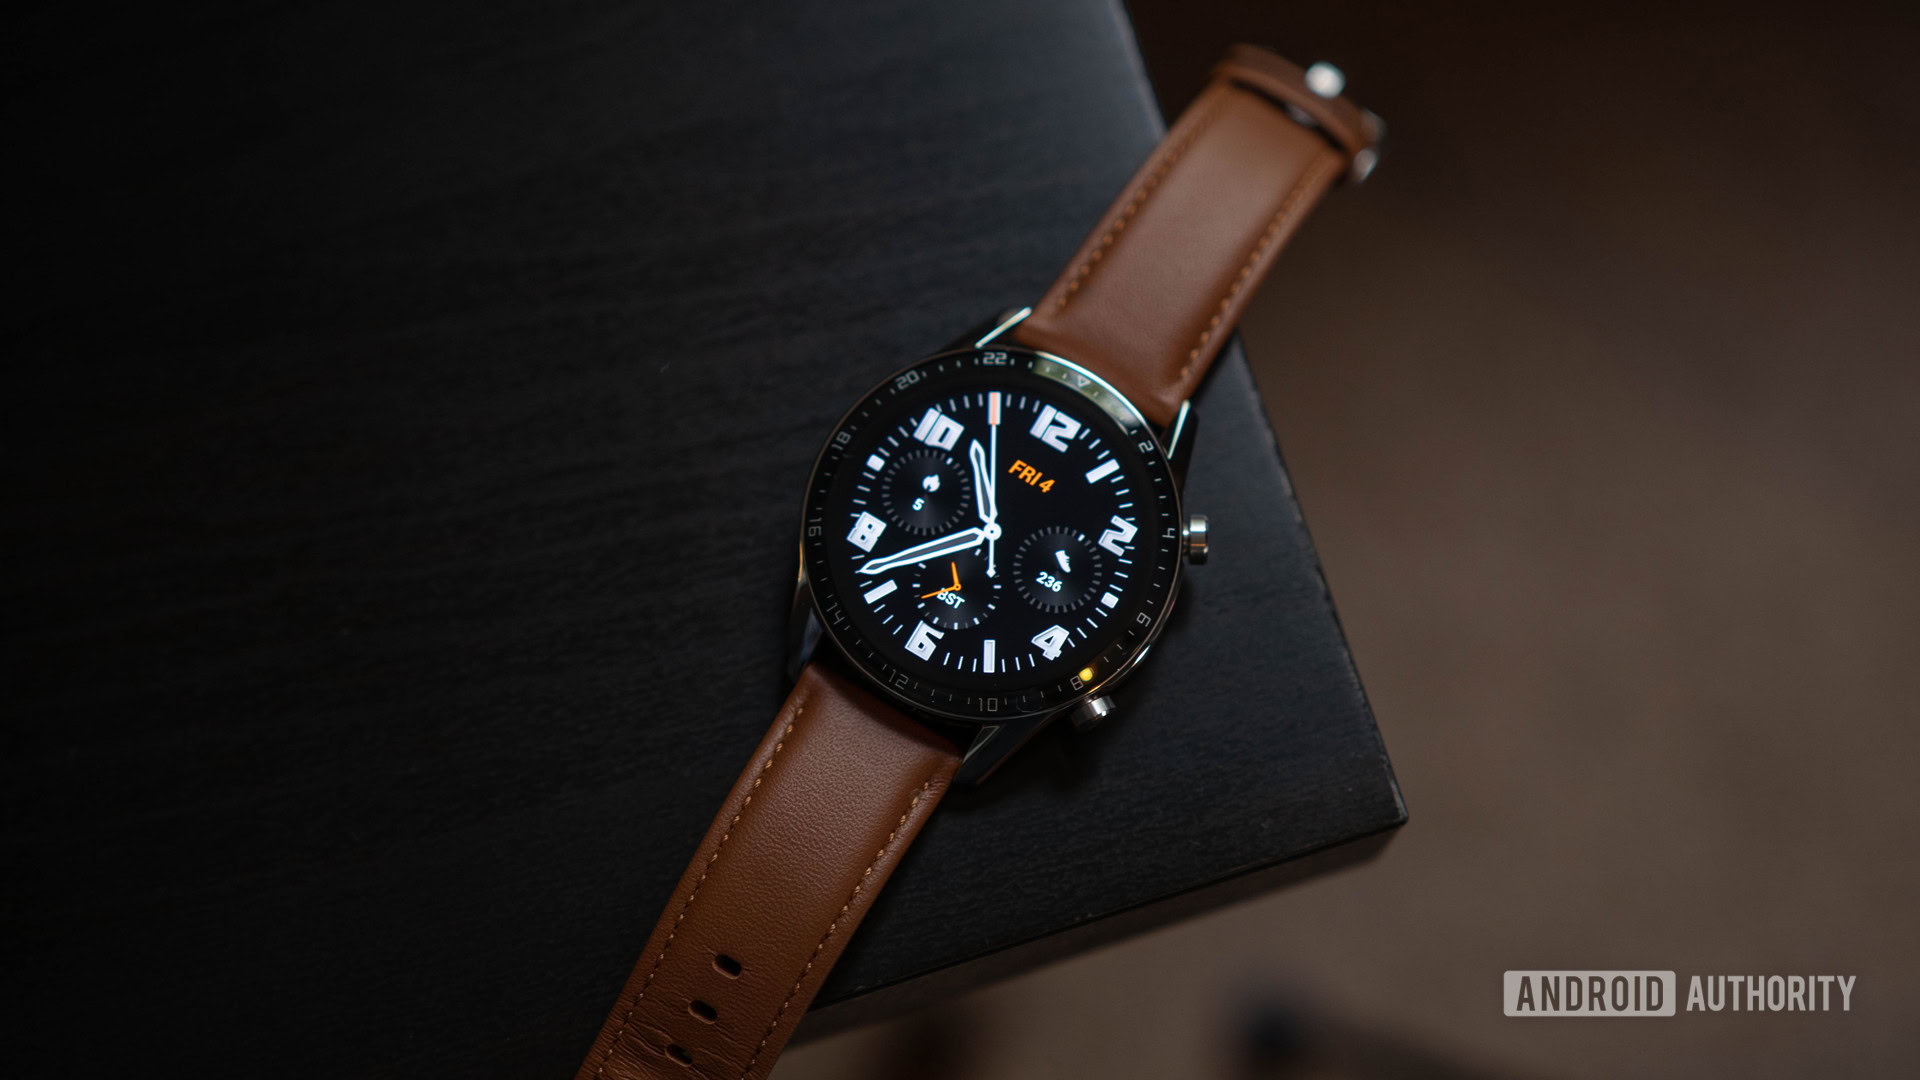 Huawei Watch GT 2 - Full phone specifications